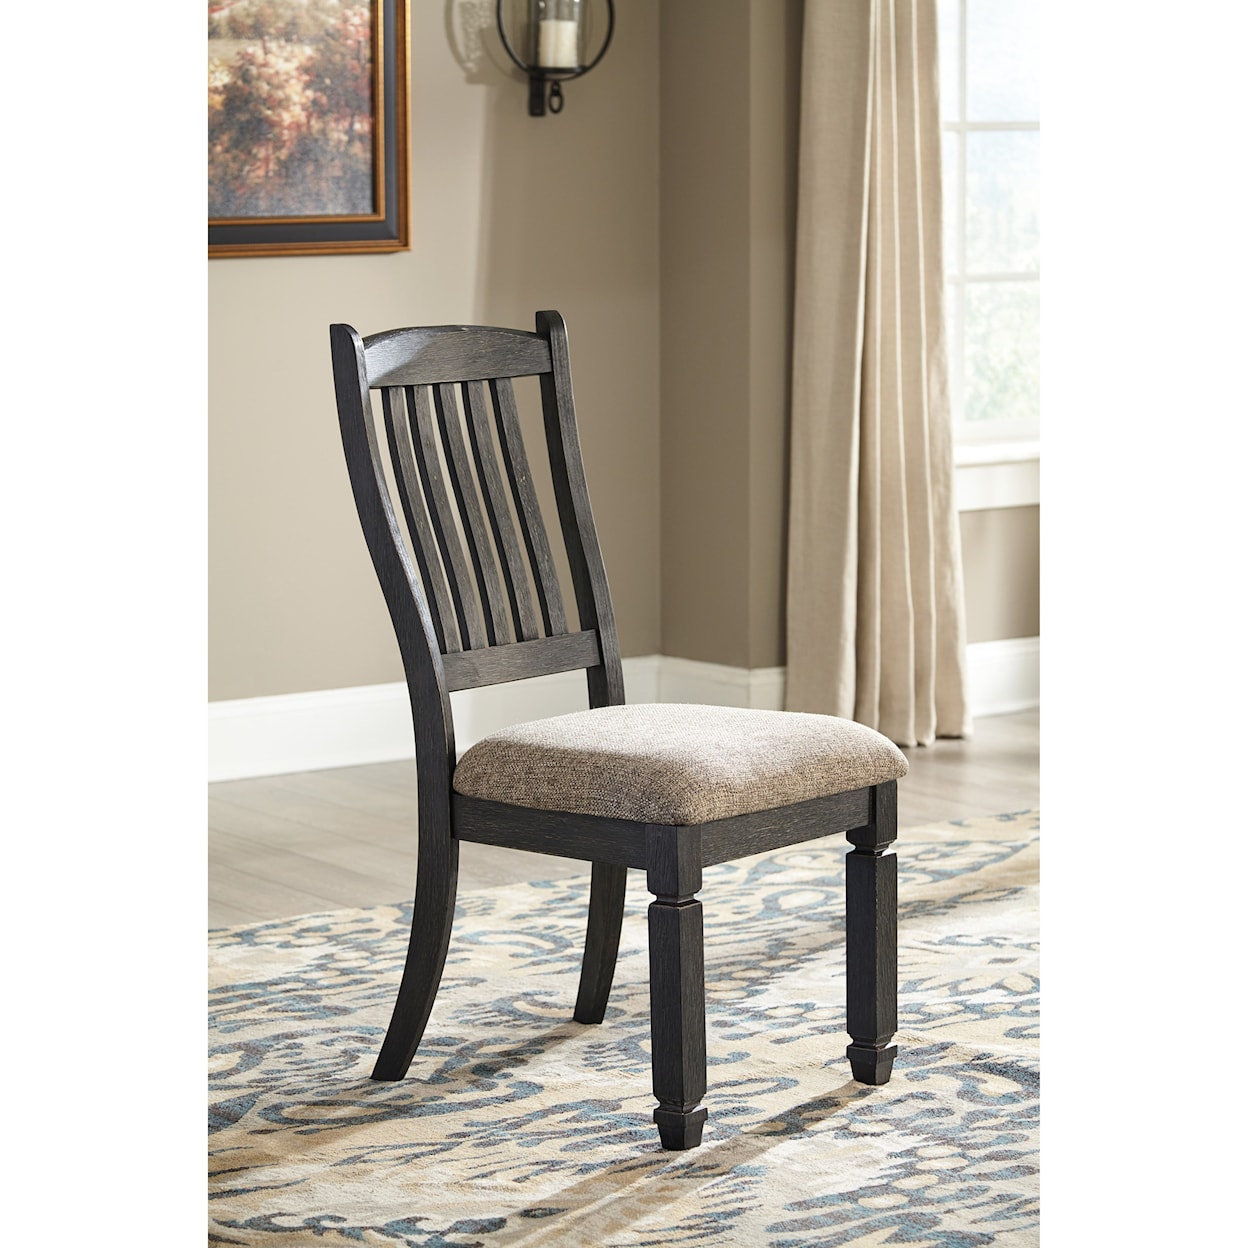 Ashley Signature Design Tyler Creek 6-Piece Table and Chair Set